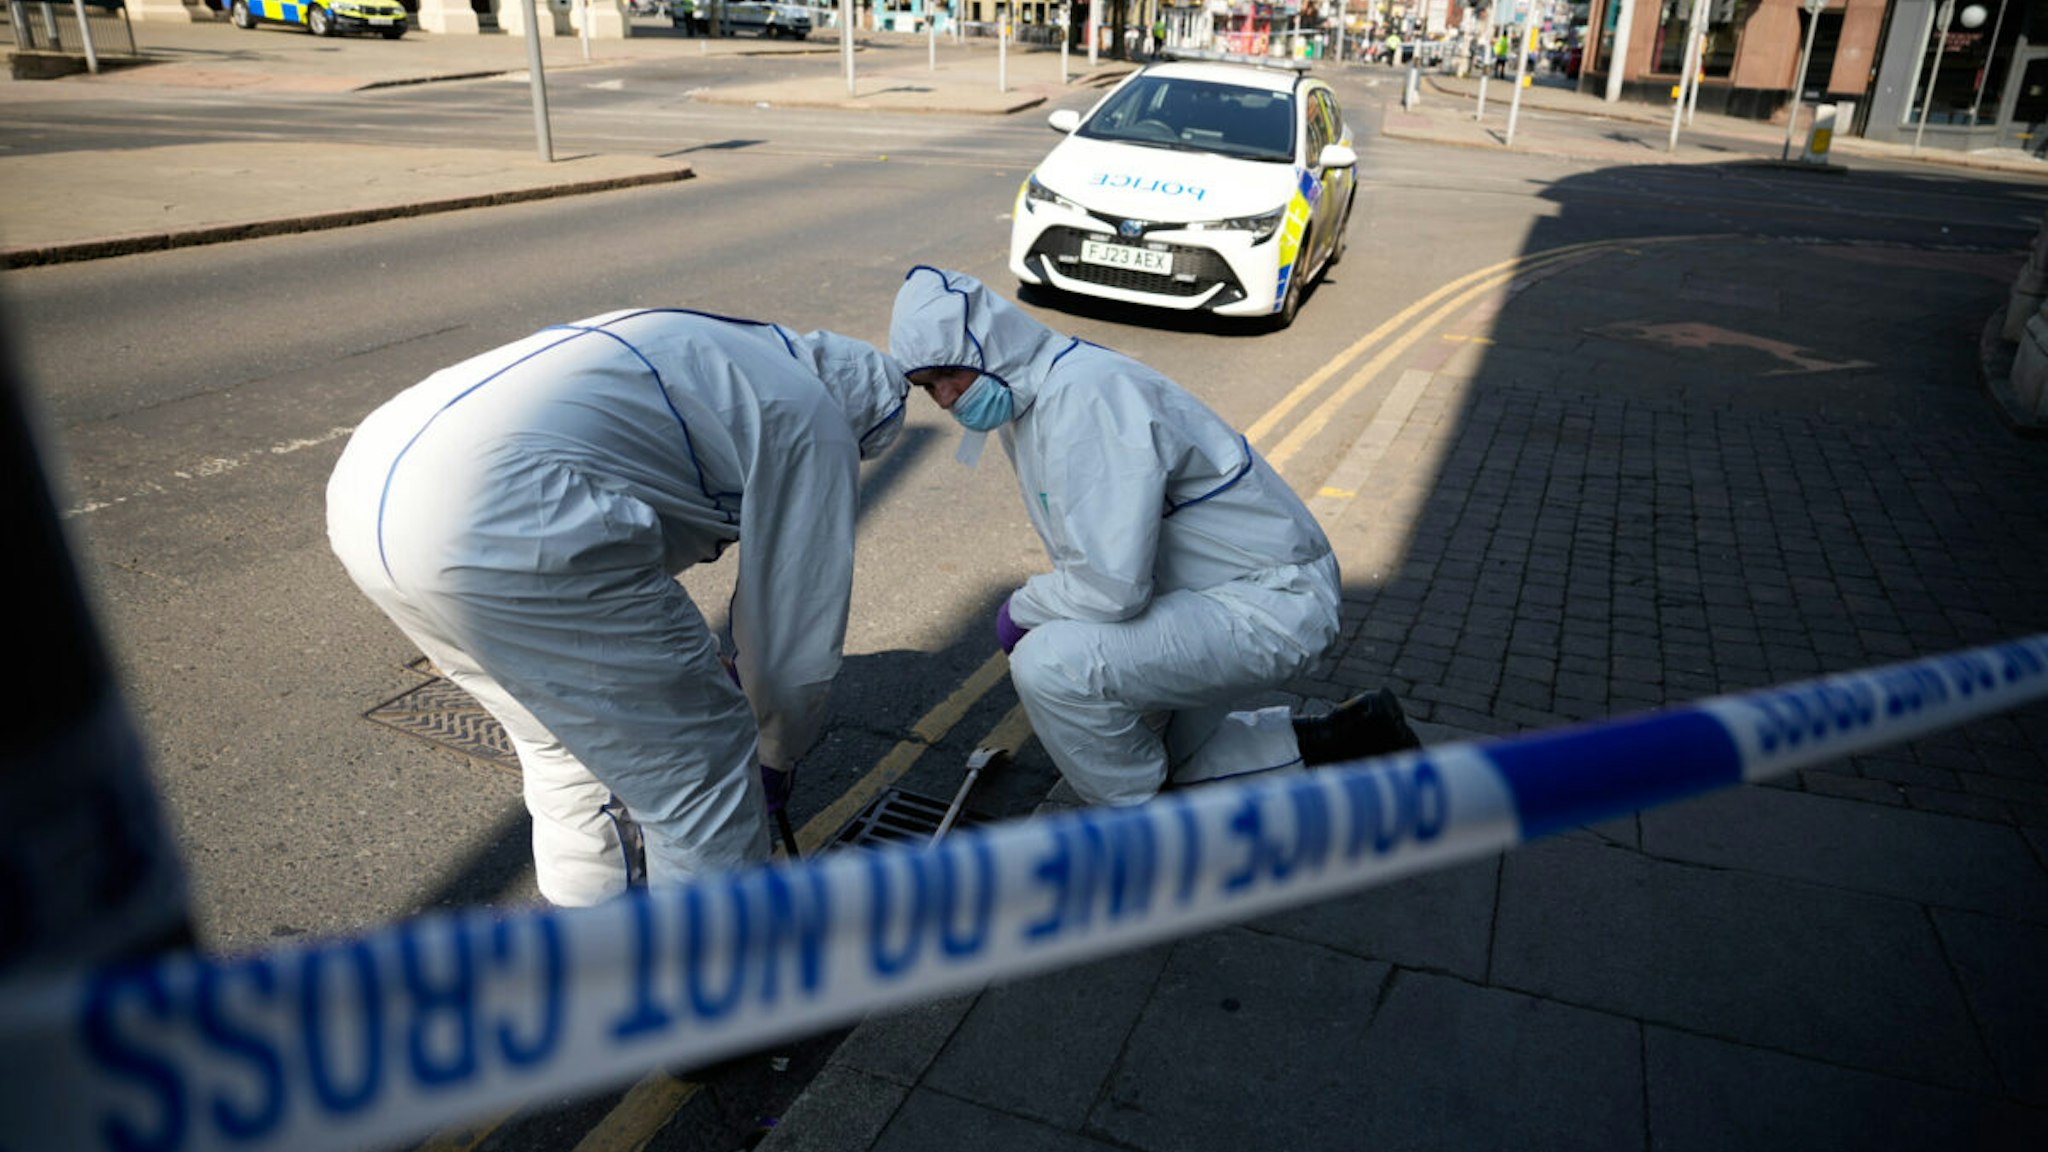 NOTTINGHAM, ENGLAND - JUNE 13: Forensic police search an area in the city centre after several people were attacked earlier today on June 13, 2023 in Nottingham, England. Nottinghamshire police said a man had been arrested on suspicion of murder after three people were found dead earlier today in areas of Nottingham City Centre.